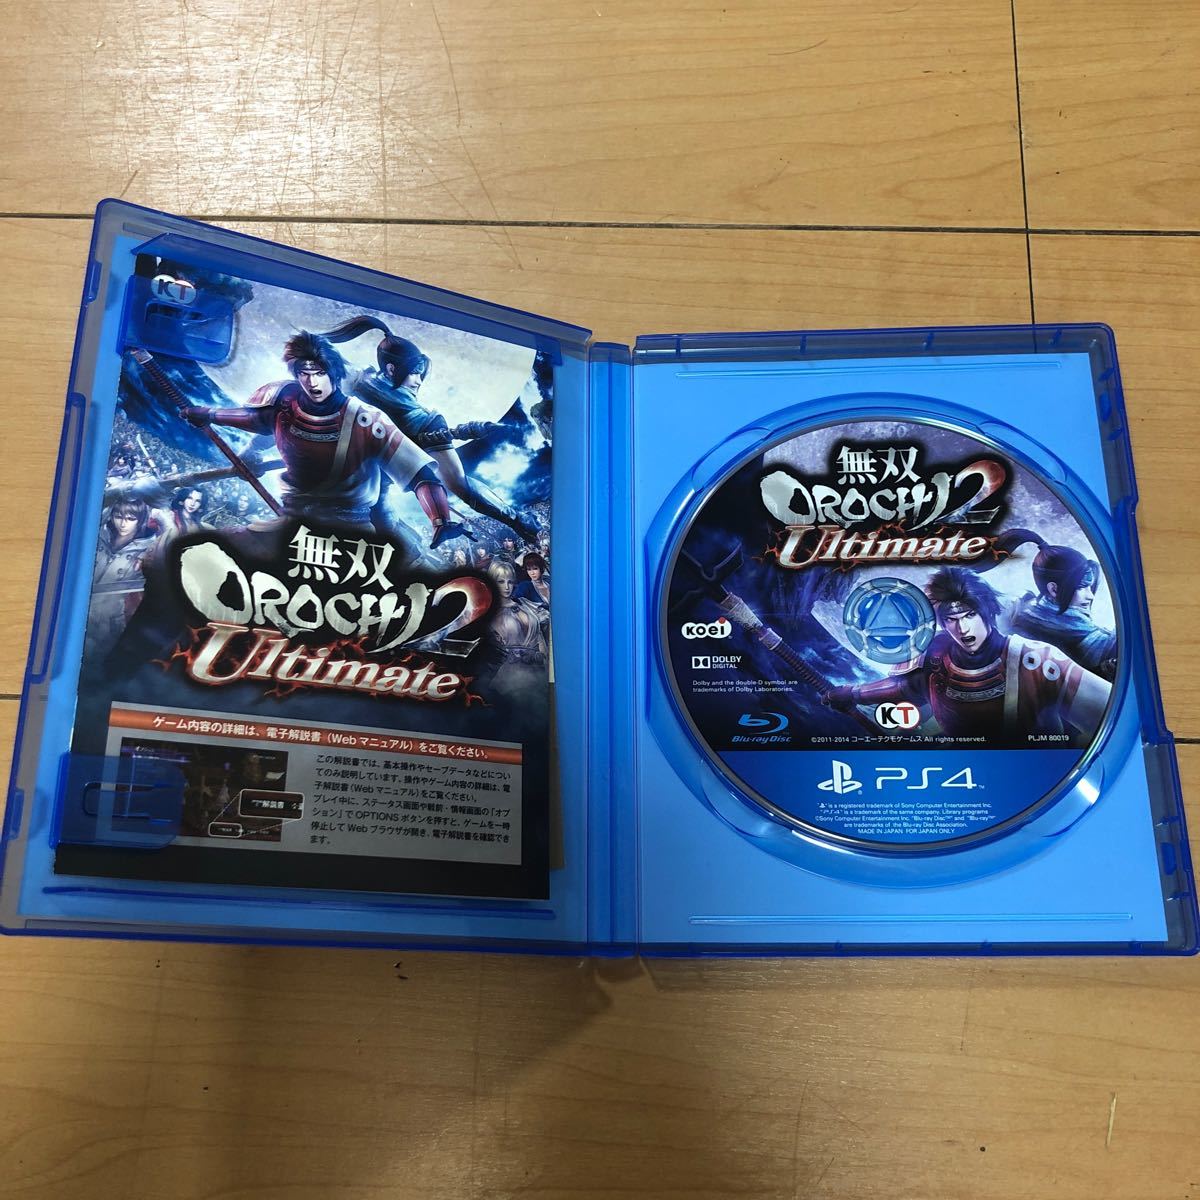 Paypayフリマ 無双orochi2 Ultimate Ps4